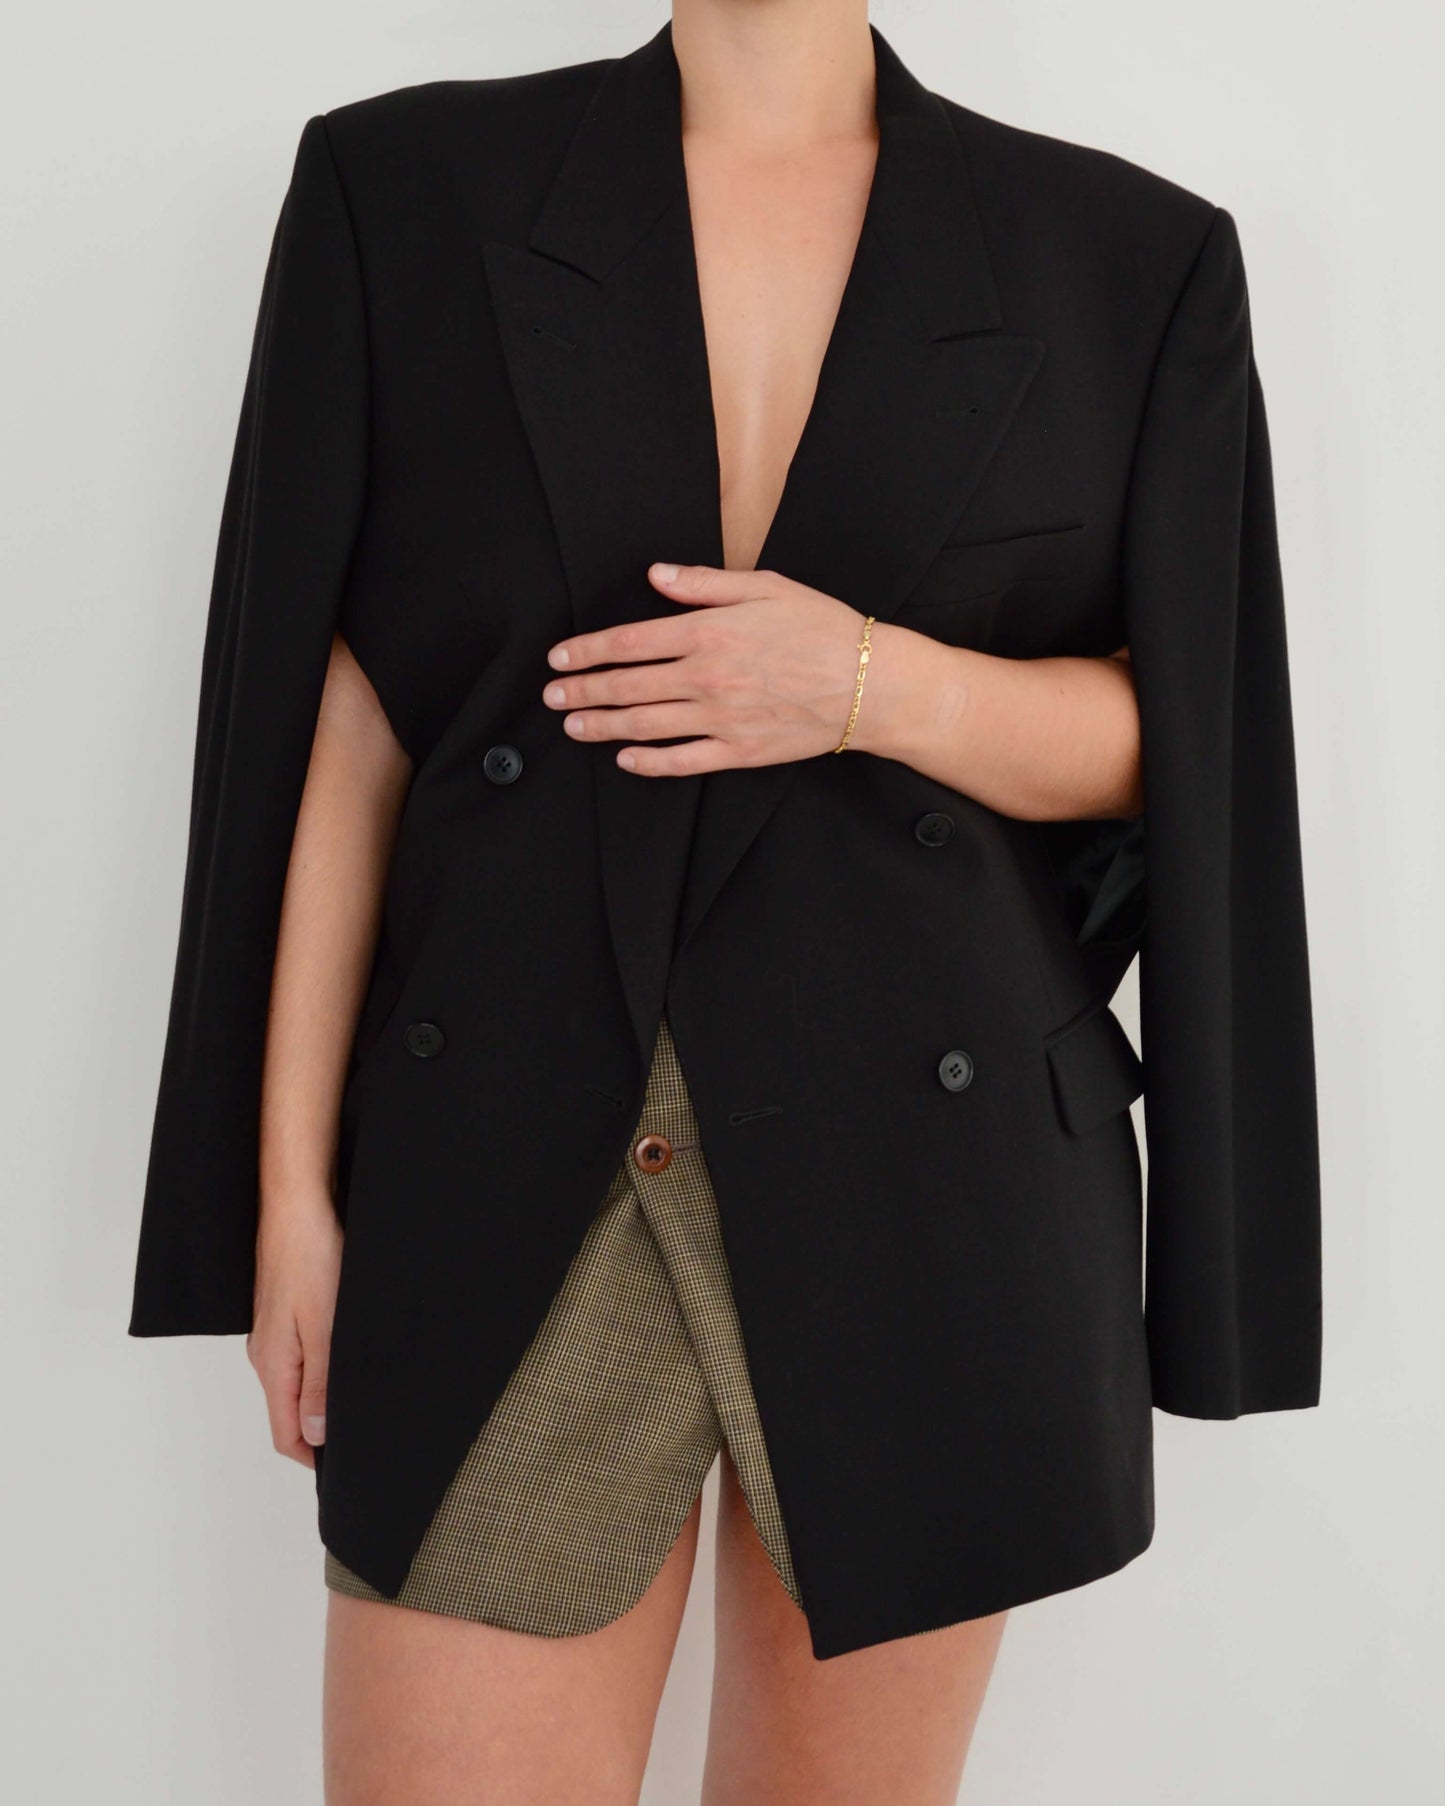 Classy Jacket - double breasted black (M/L)